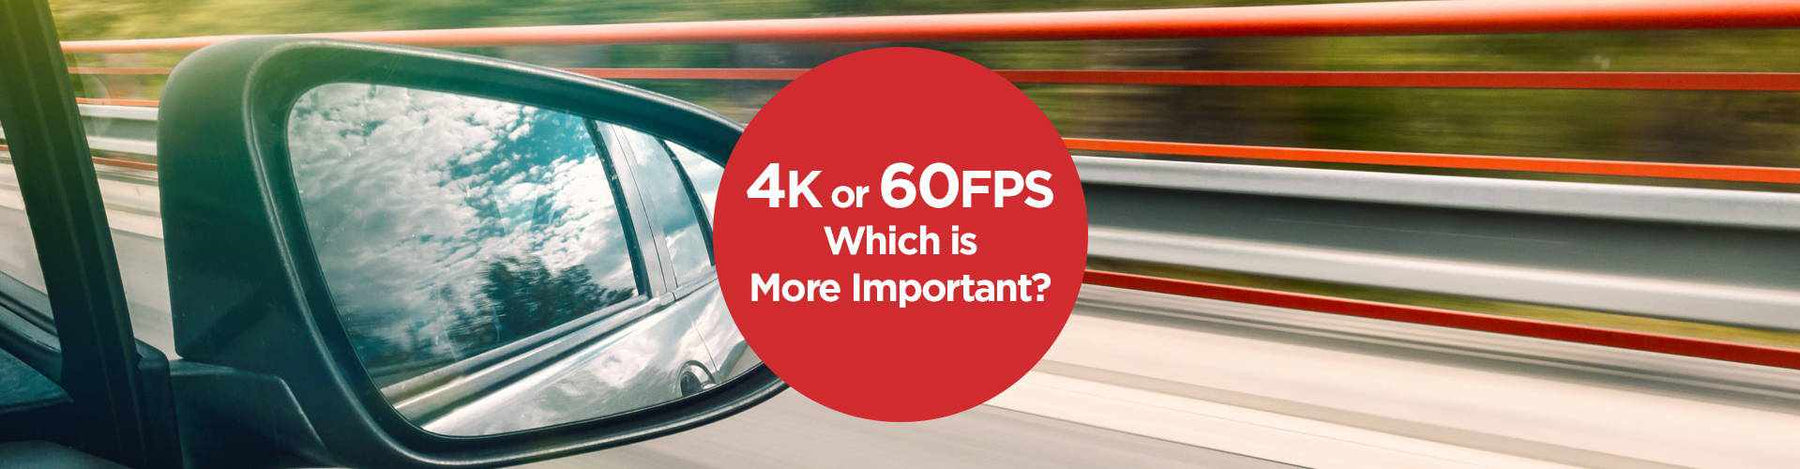 4K Video Resolution or 60FPS: Which is More Important in a Dash Cam?